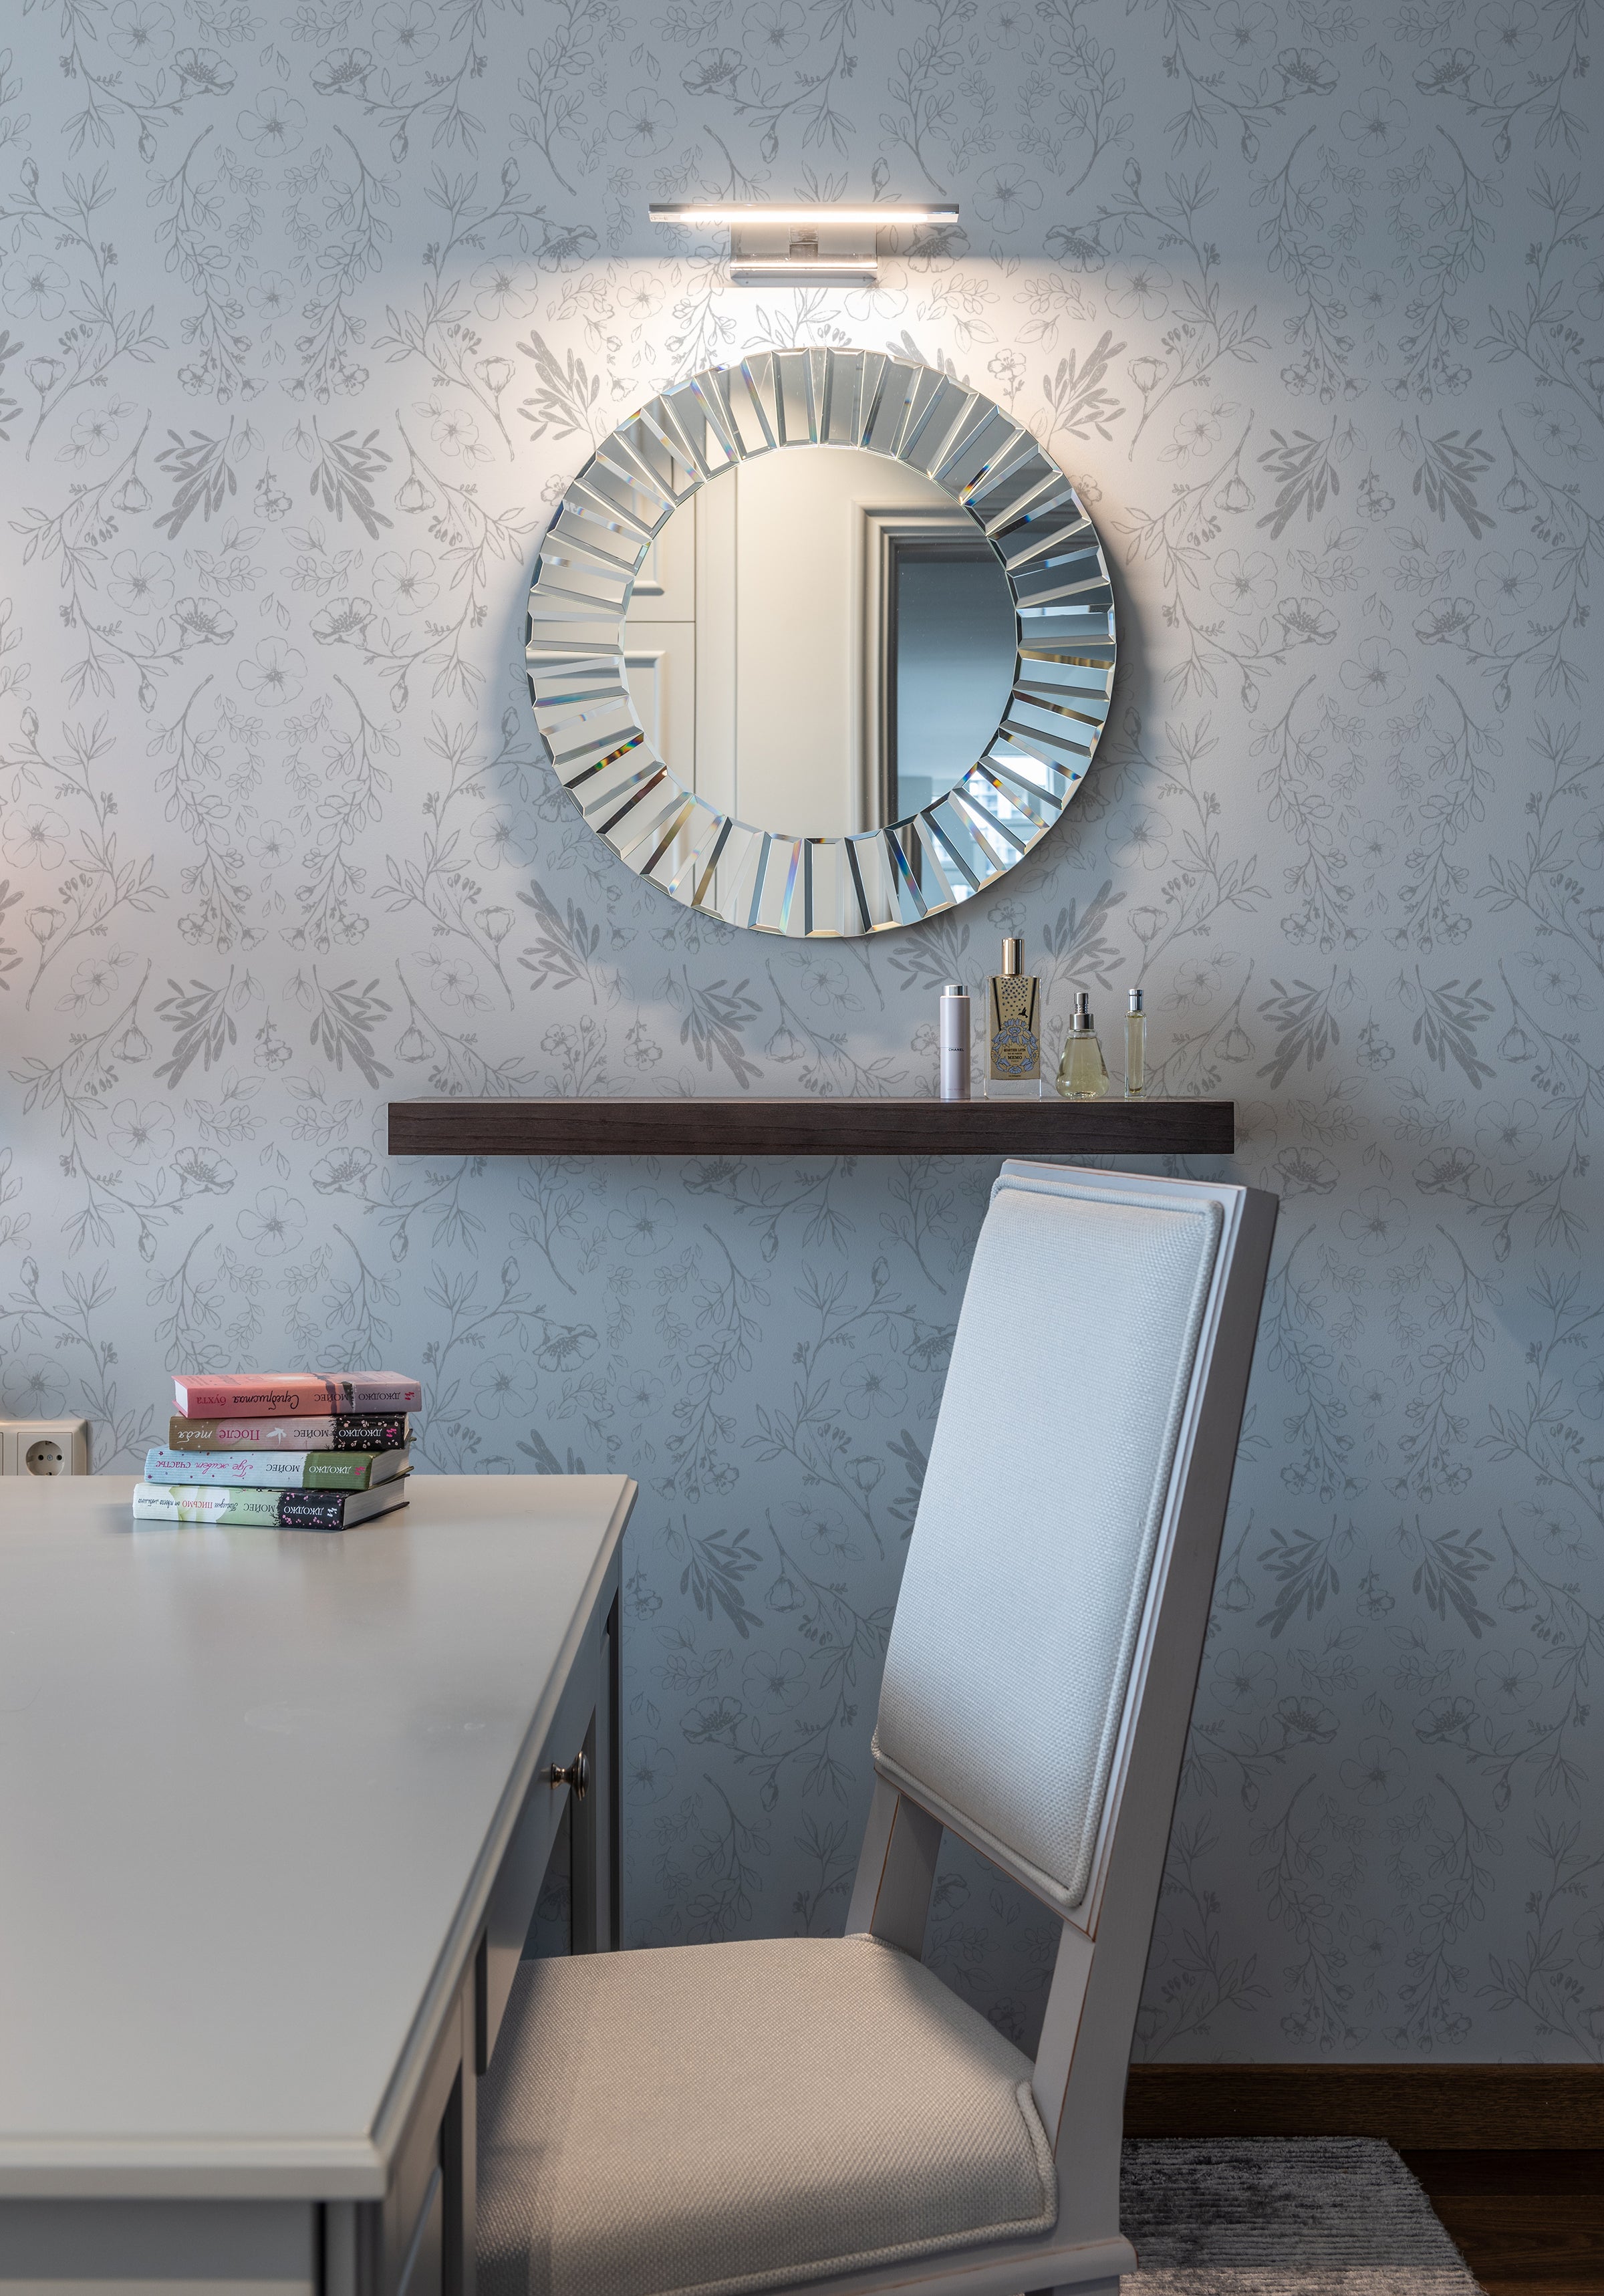 An intimate vanity corner with Rustic Vintage Floral wallpaper creating a delicate backdrop for a modern circular mirror and a dark wooden shelf, blending vintage charm with contemporary design